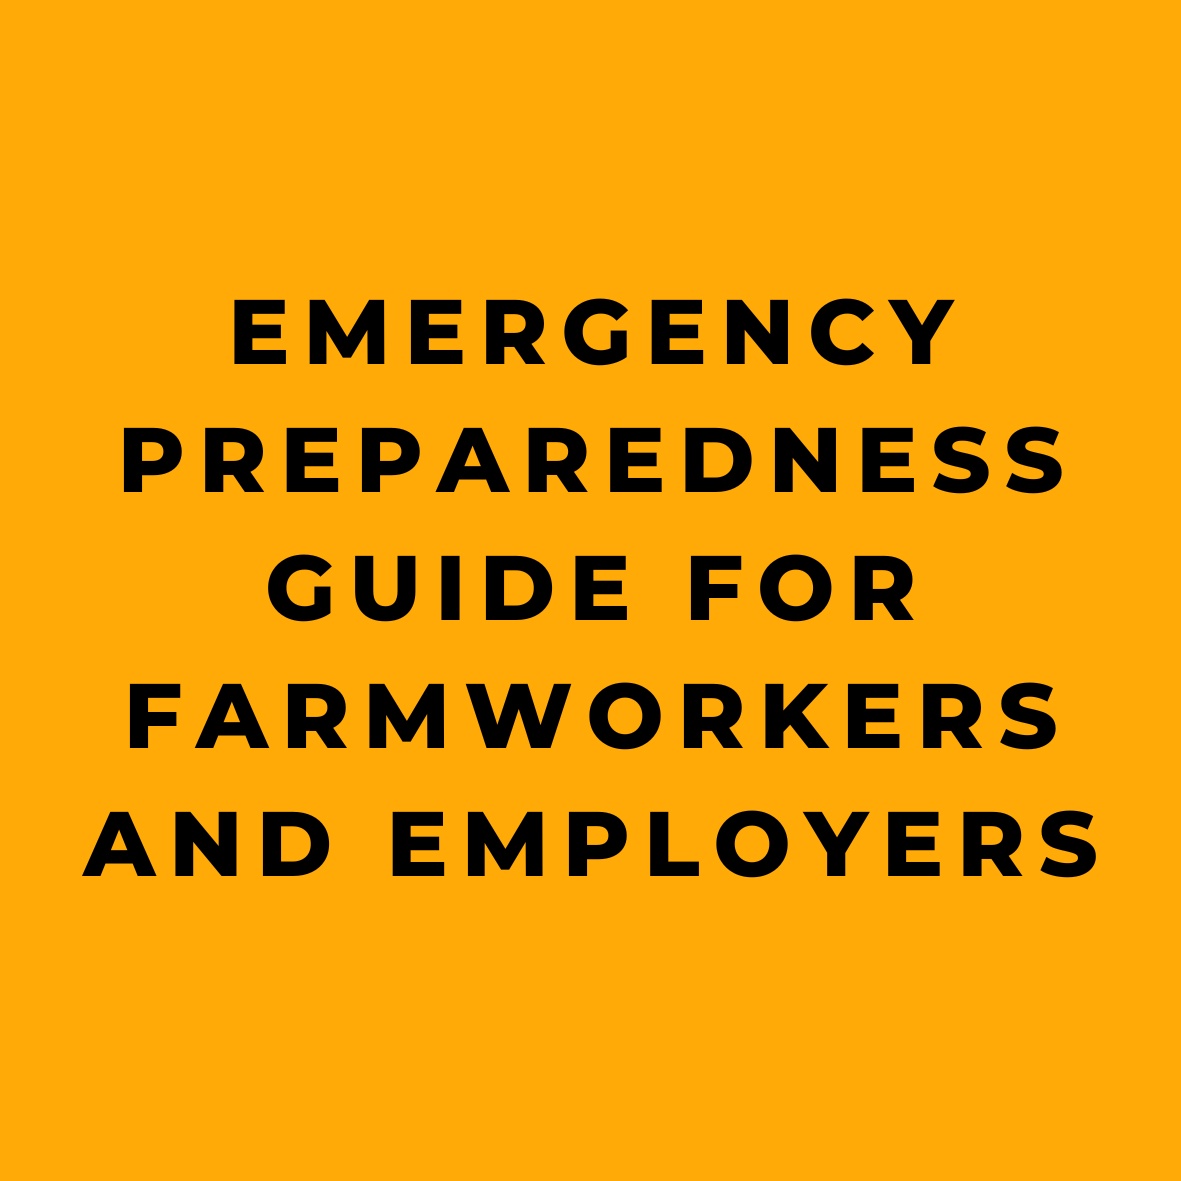 Emergency Preparedness Guide for Farmworkers and Employers